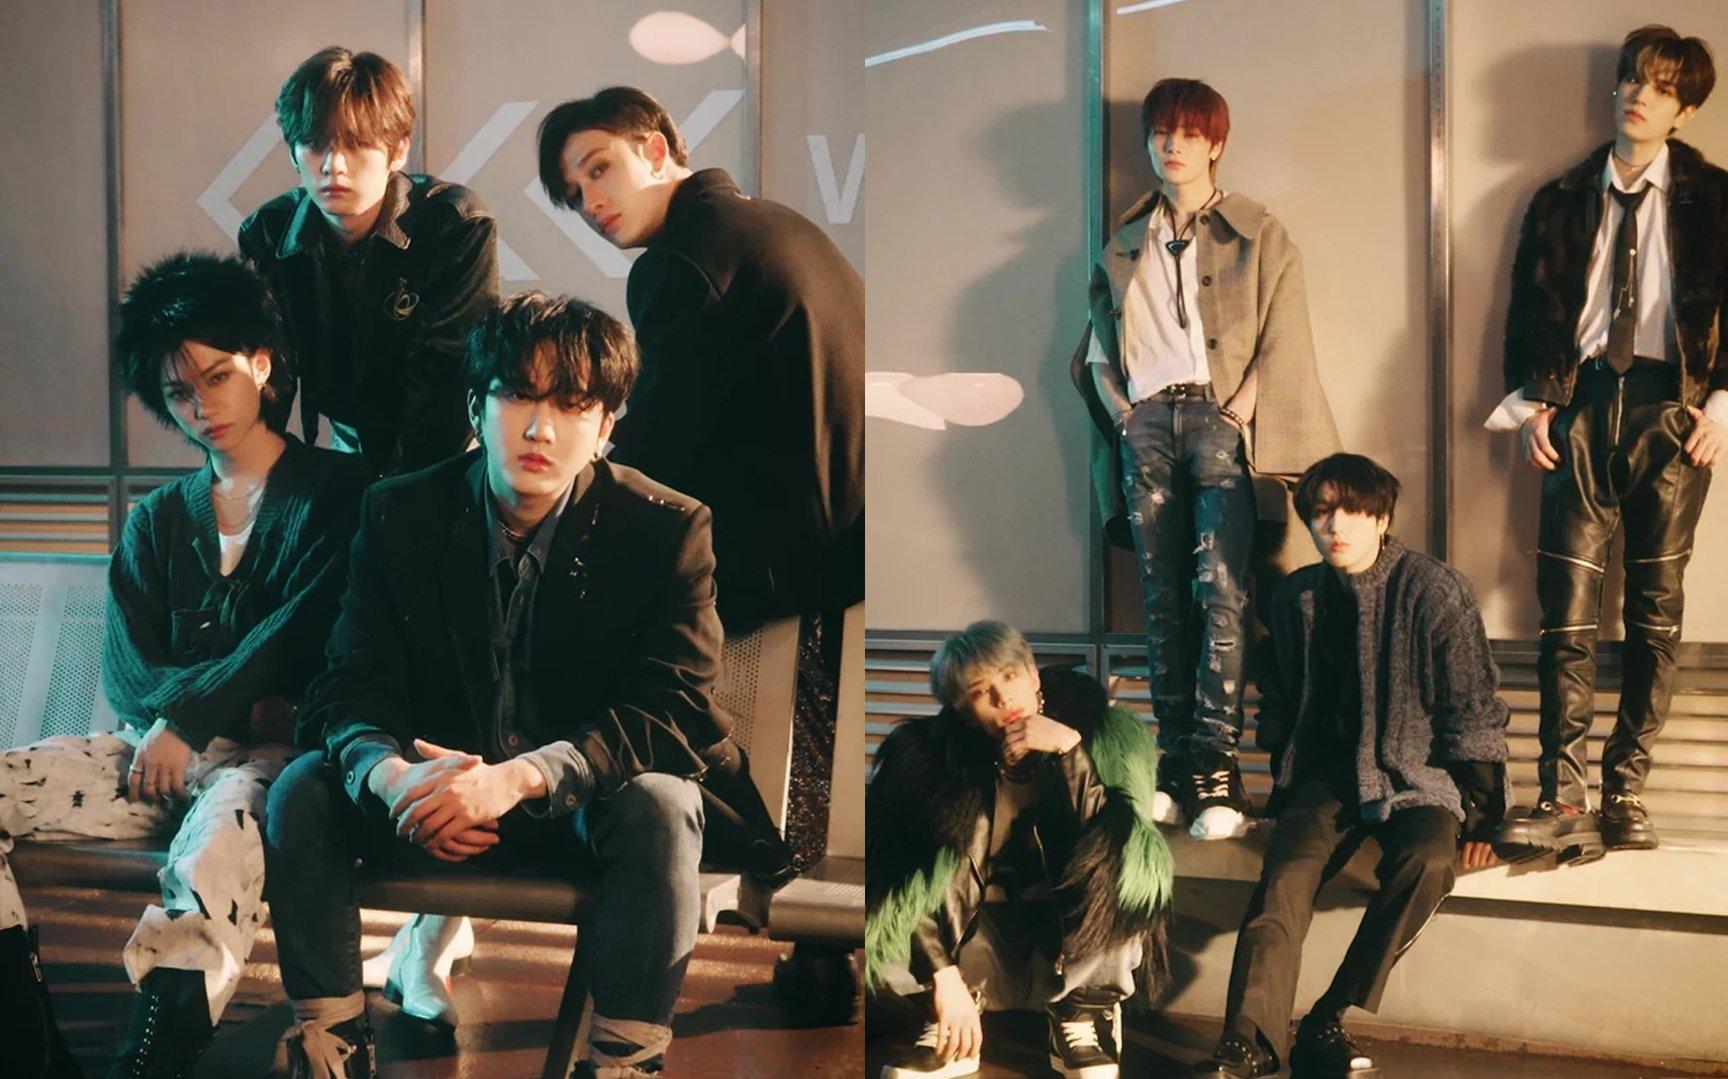 Stray Kids Exude Their Charisma In The New Teaser Videos And